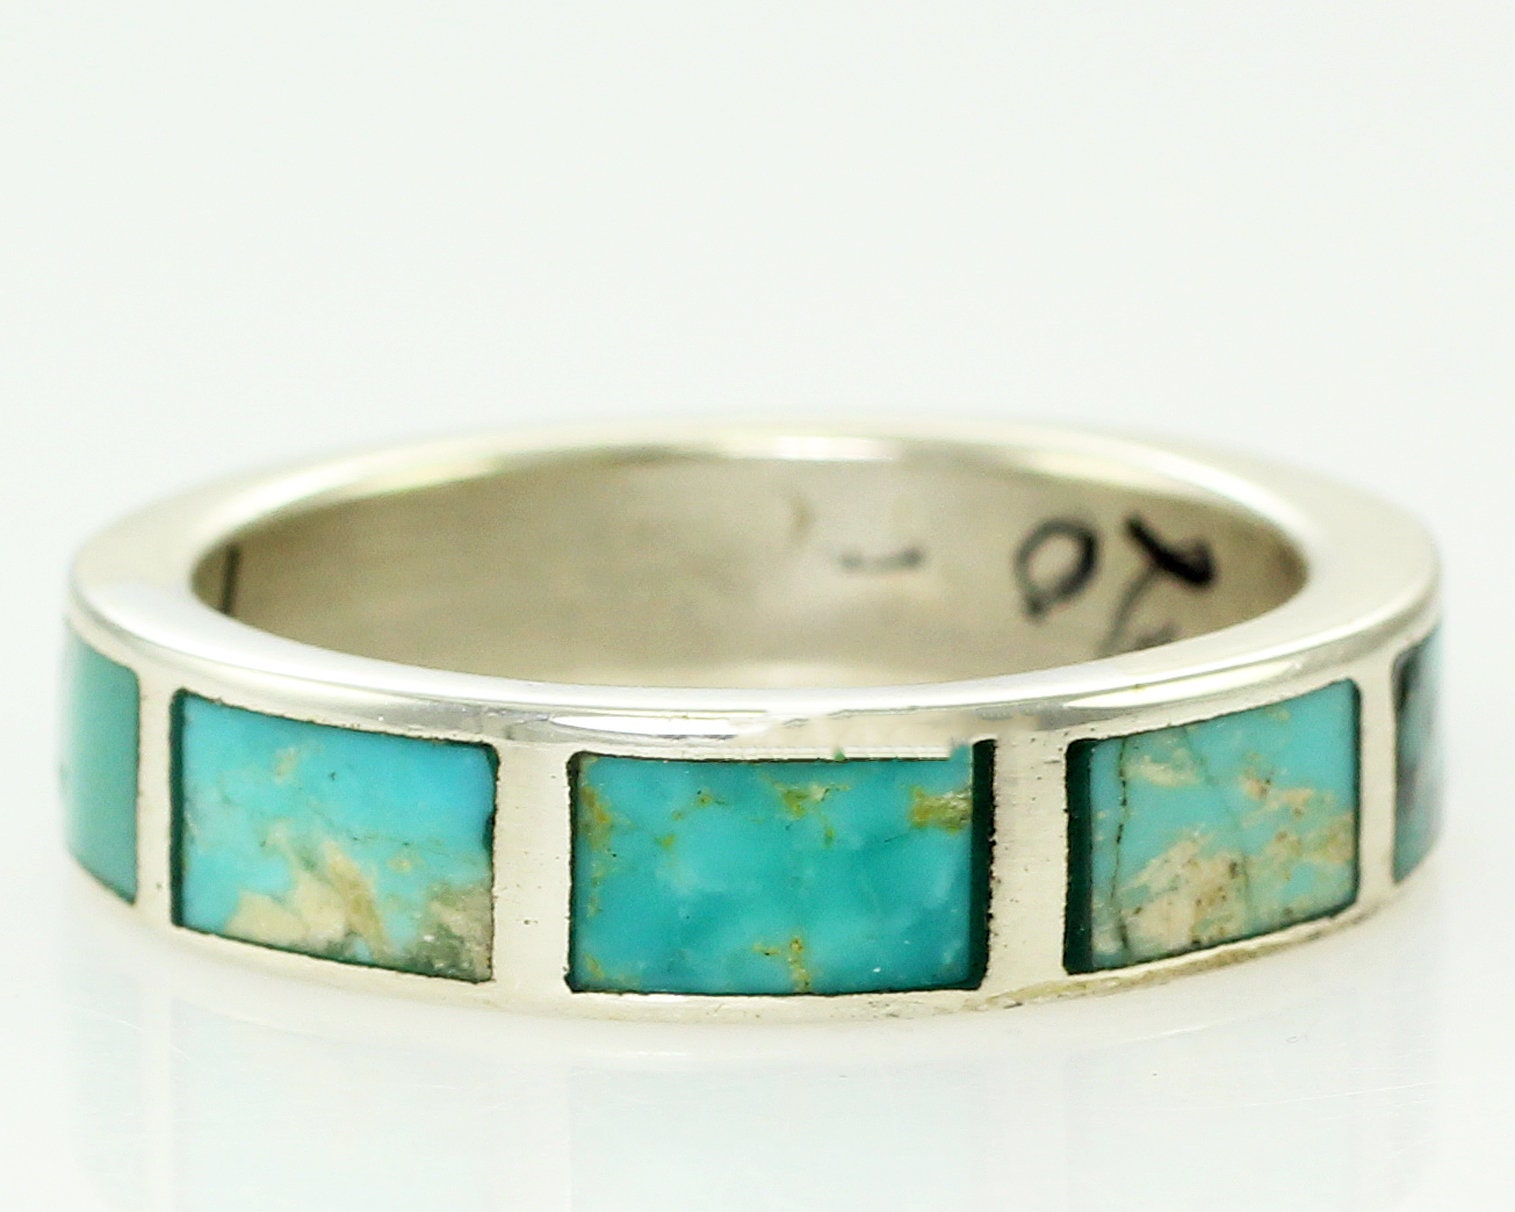 Vintage Turquoise Inlaid Sterling Silver Wedding Band Ring